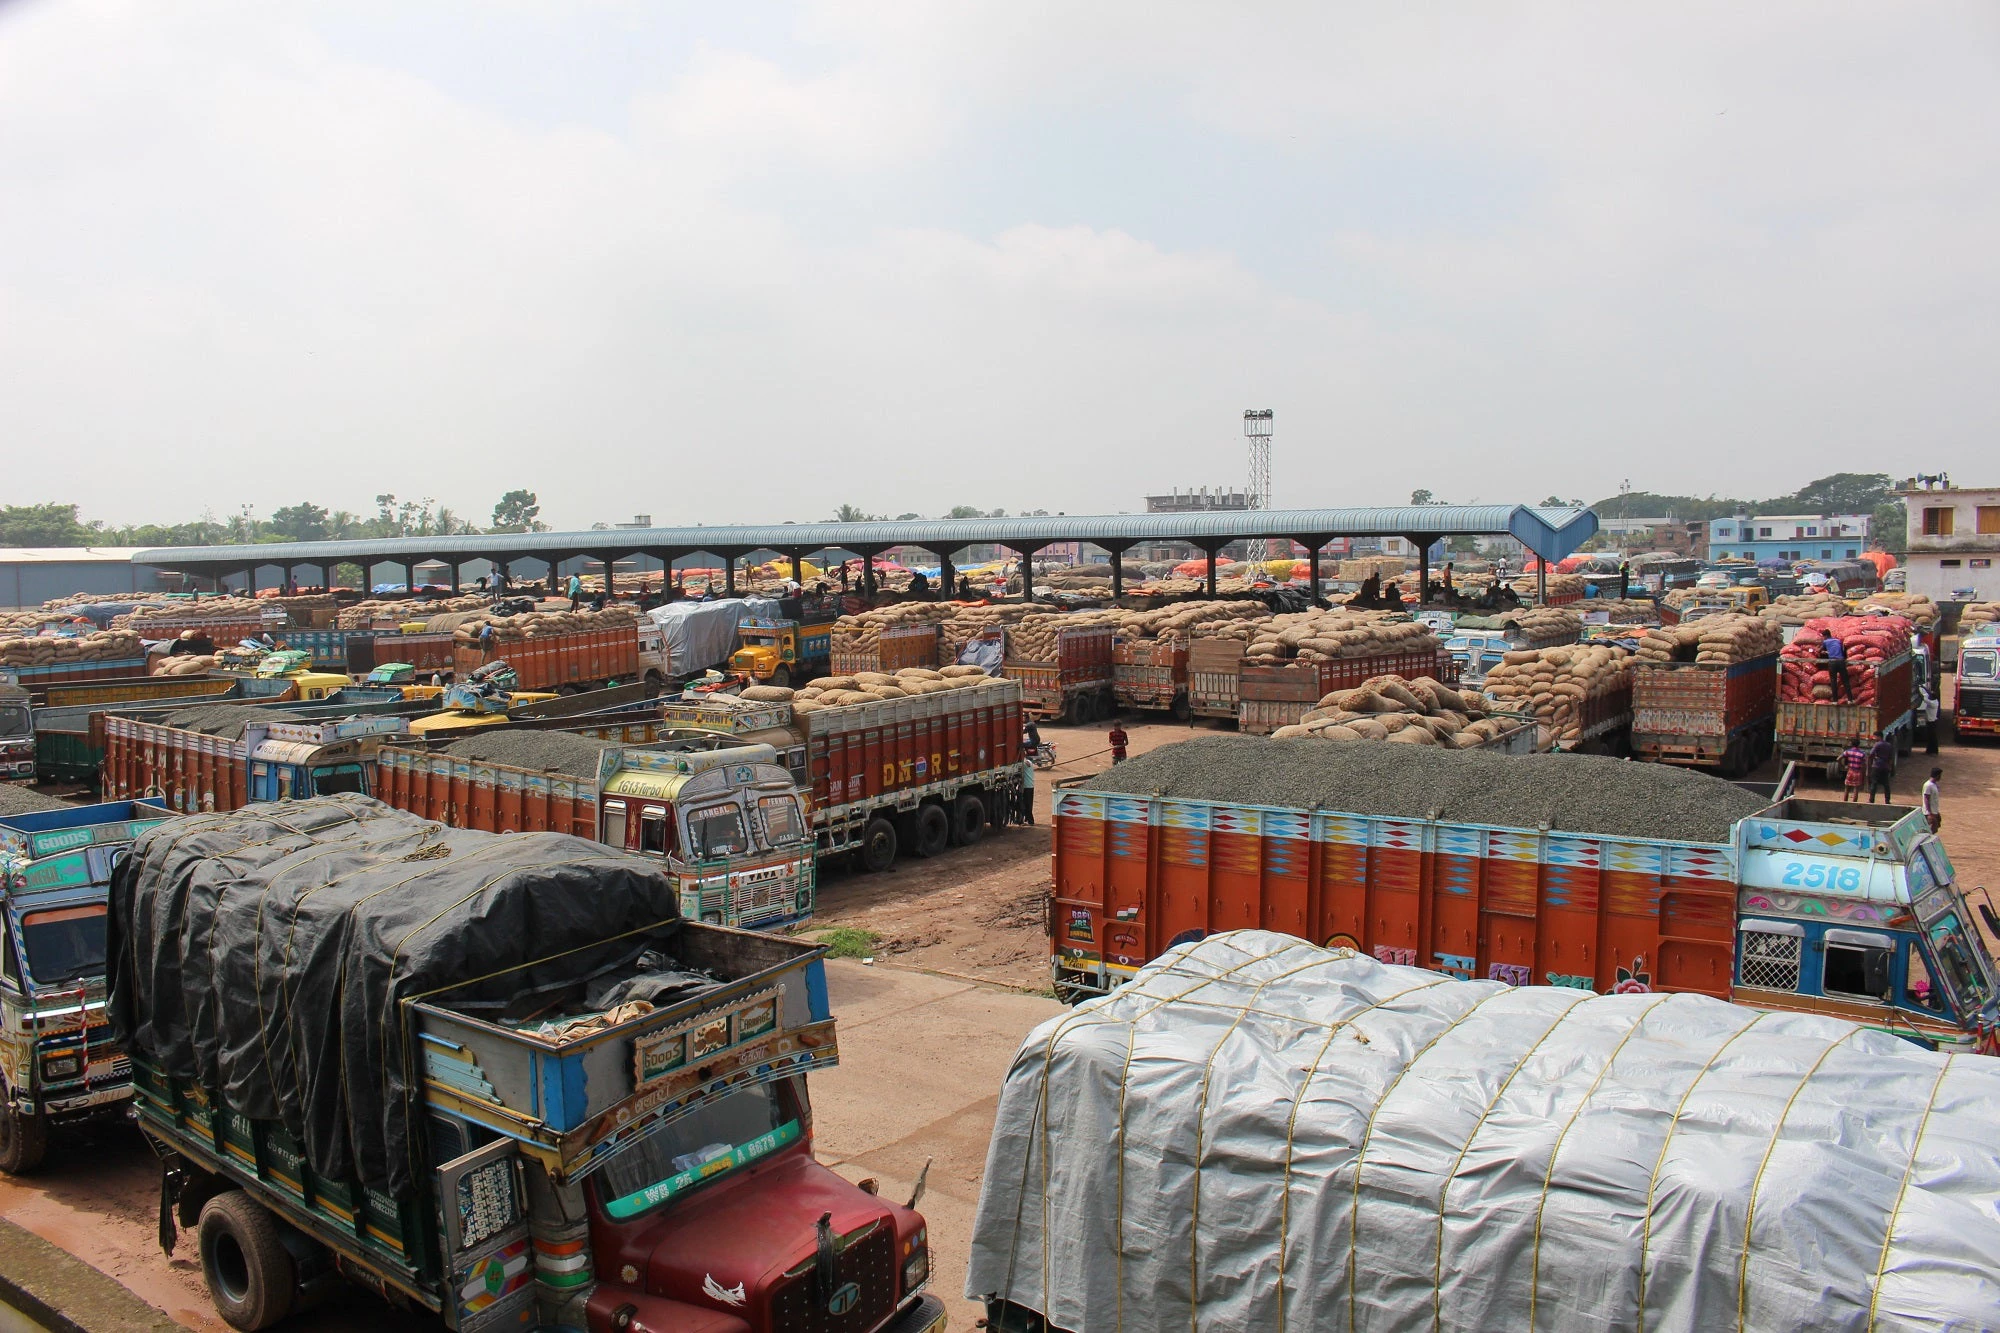 Bhomra land port: COVID-19 may provide an opportunity to move from manual processes to automated trade, transport, and logistics solutions. Photo: Erik Nora/World Bank